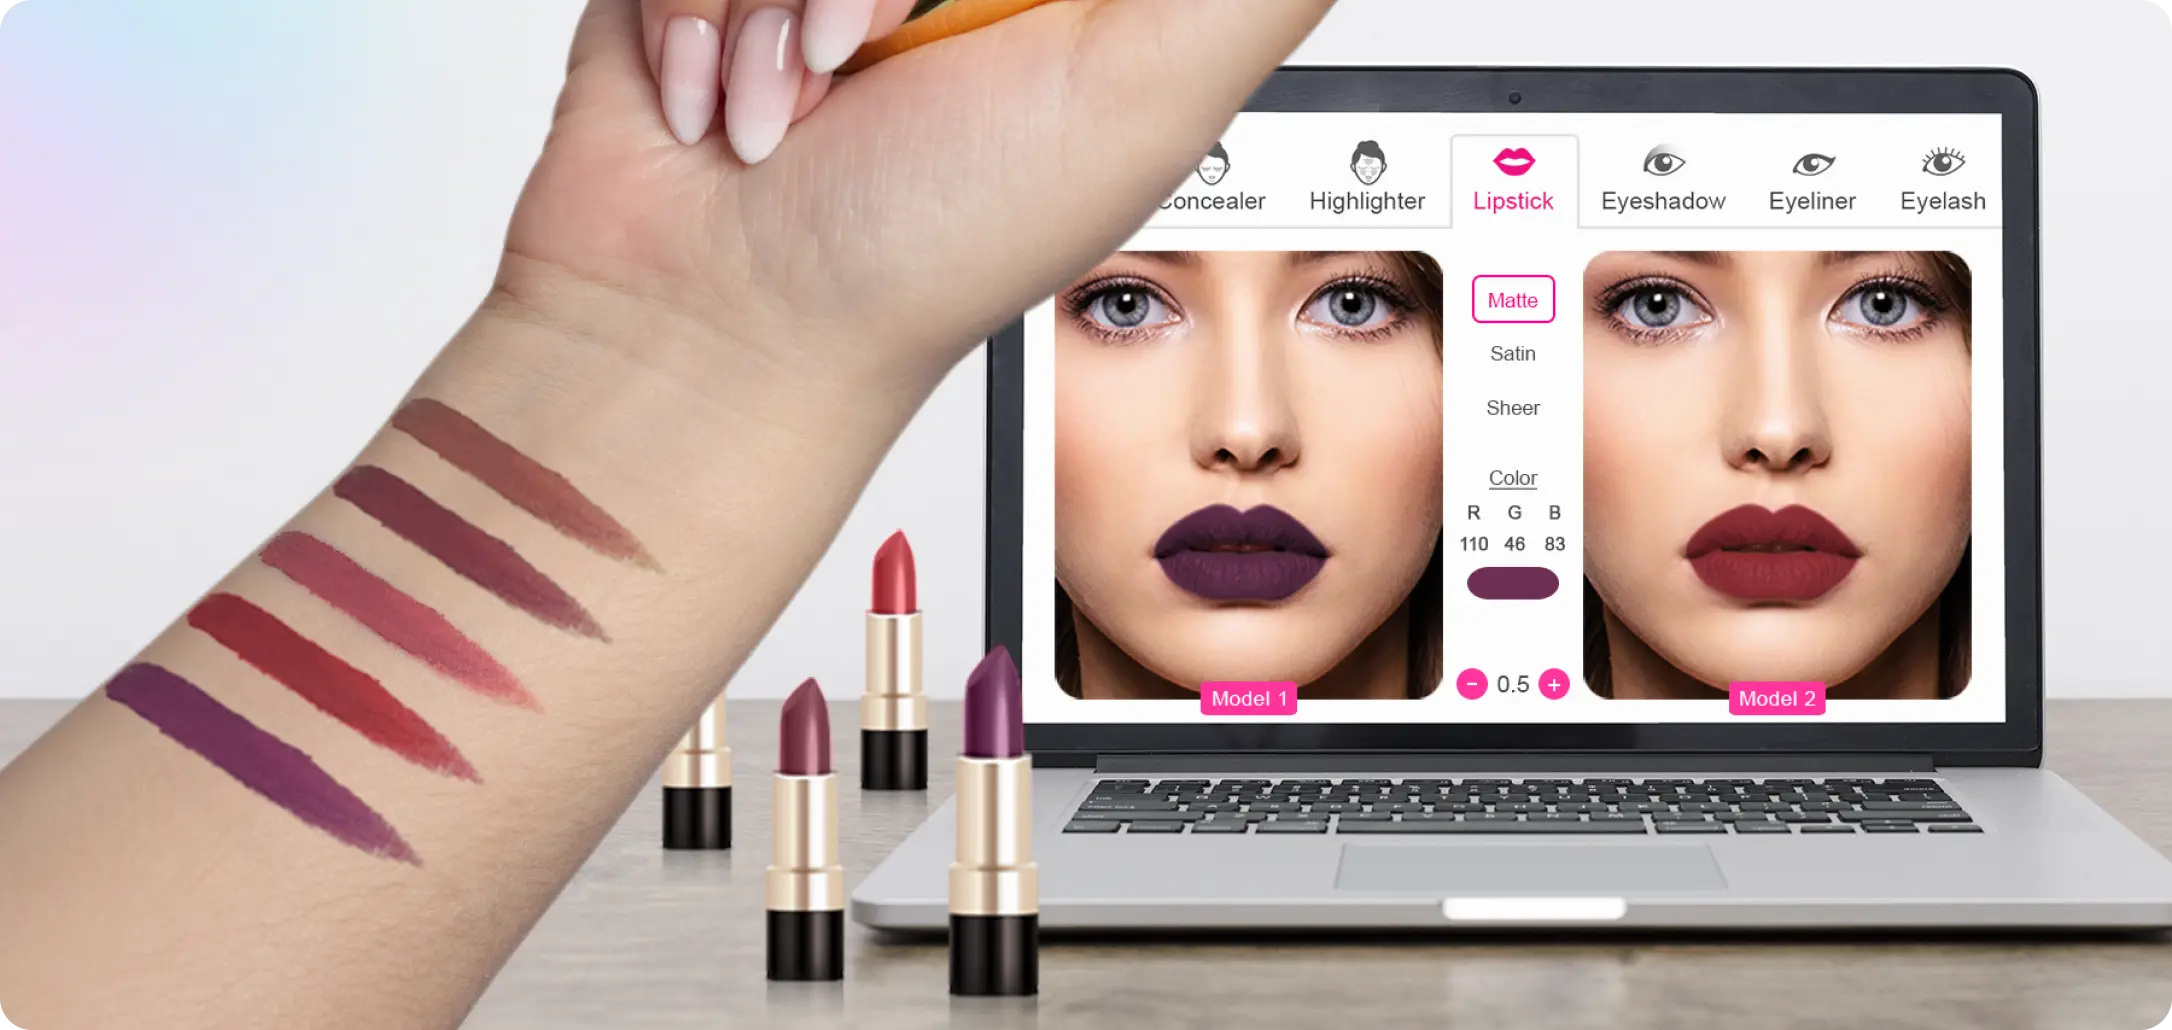 Hand of a woman trying lipstick swatches and a laptop screen showing virtual lipstick try-on